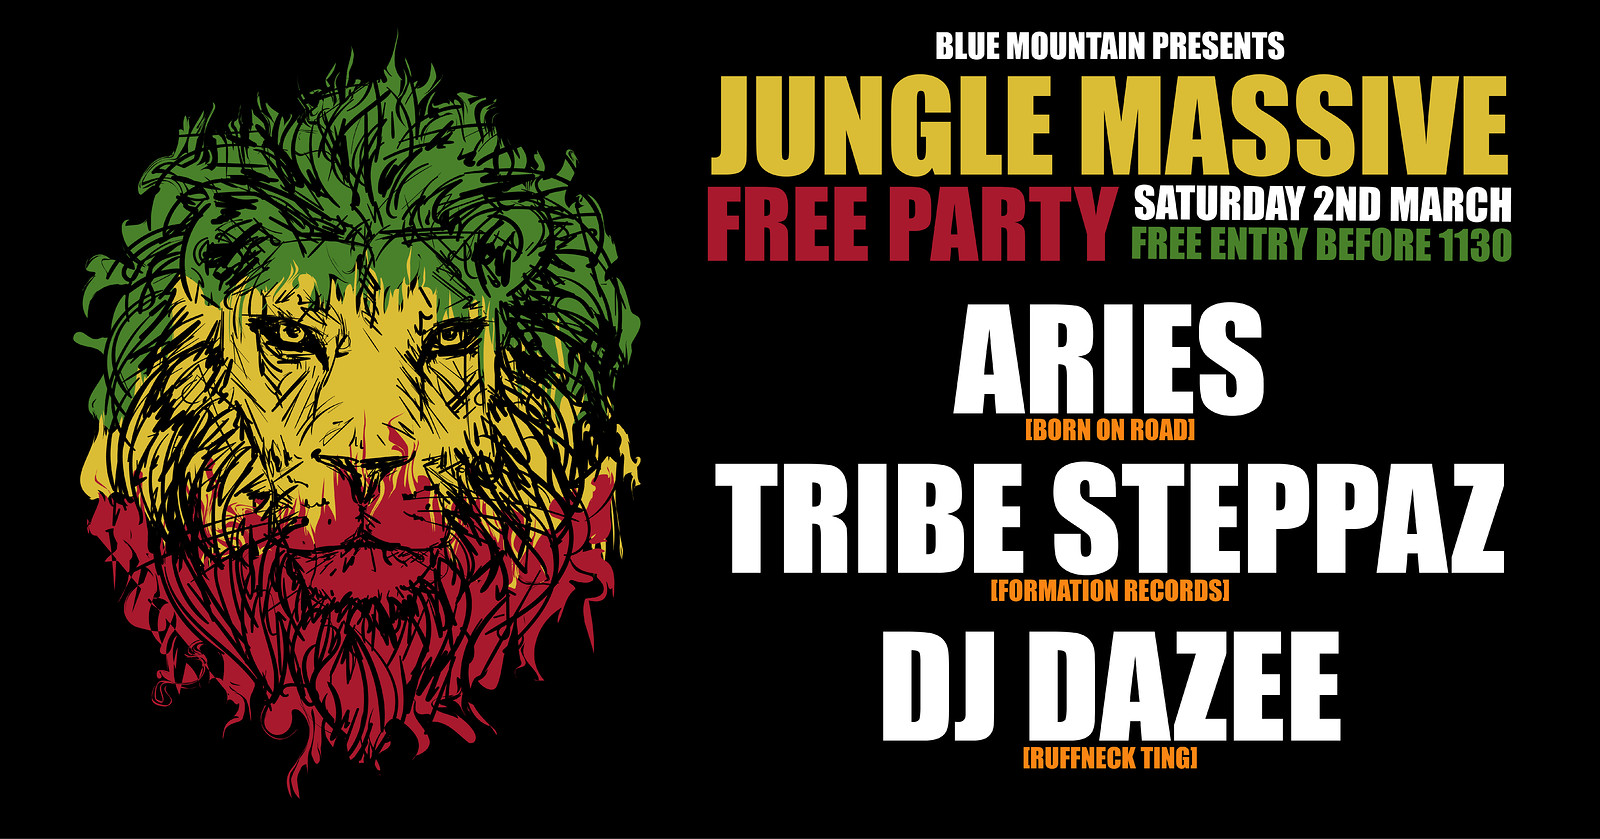 Blue Mountian: Jungle Massive Free Party at Blue Mountain